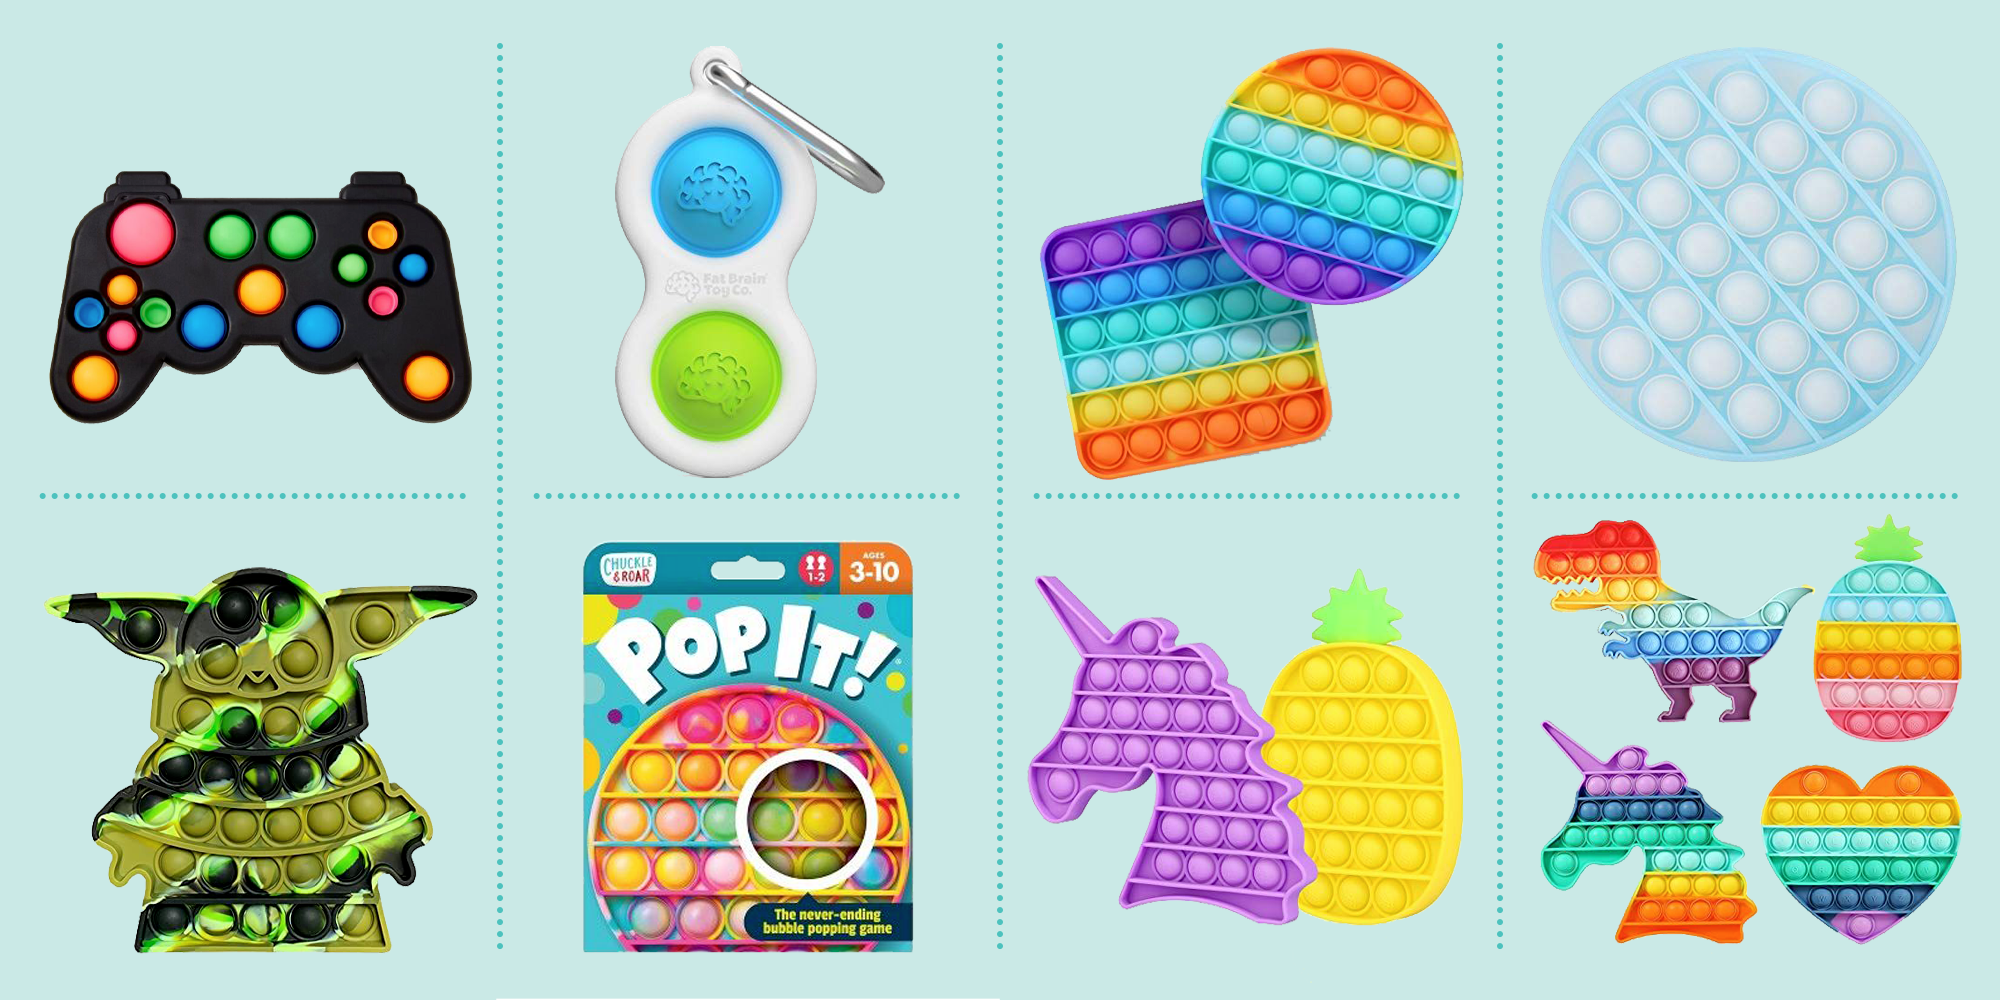 10 Best Pop Toys of 2022 - Top Sensory Gadgets Kids and Adults